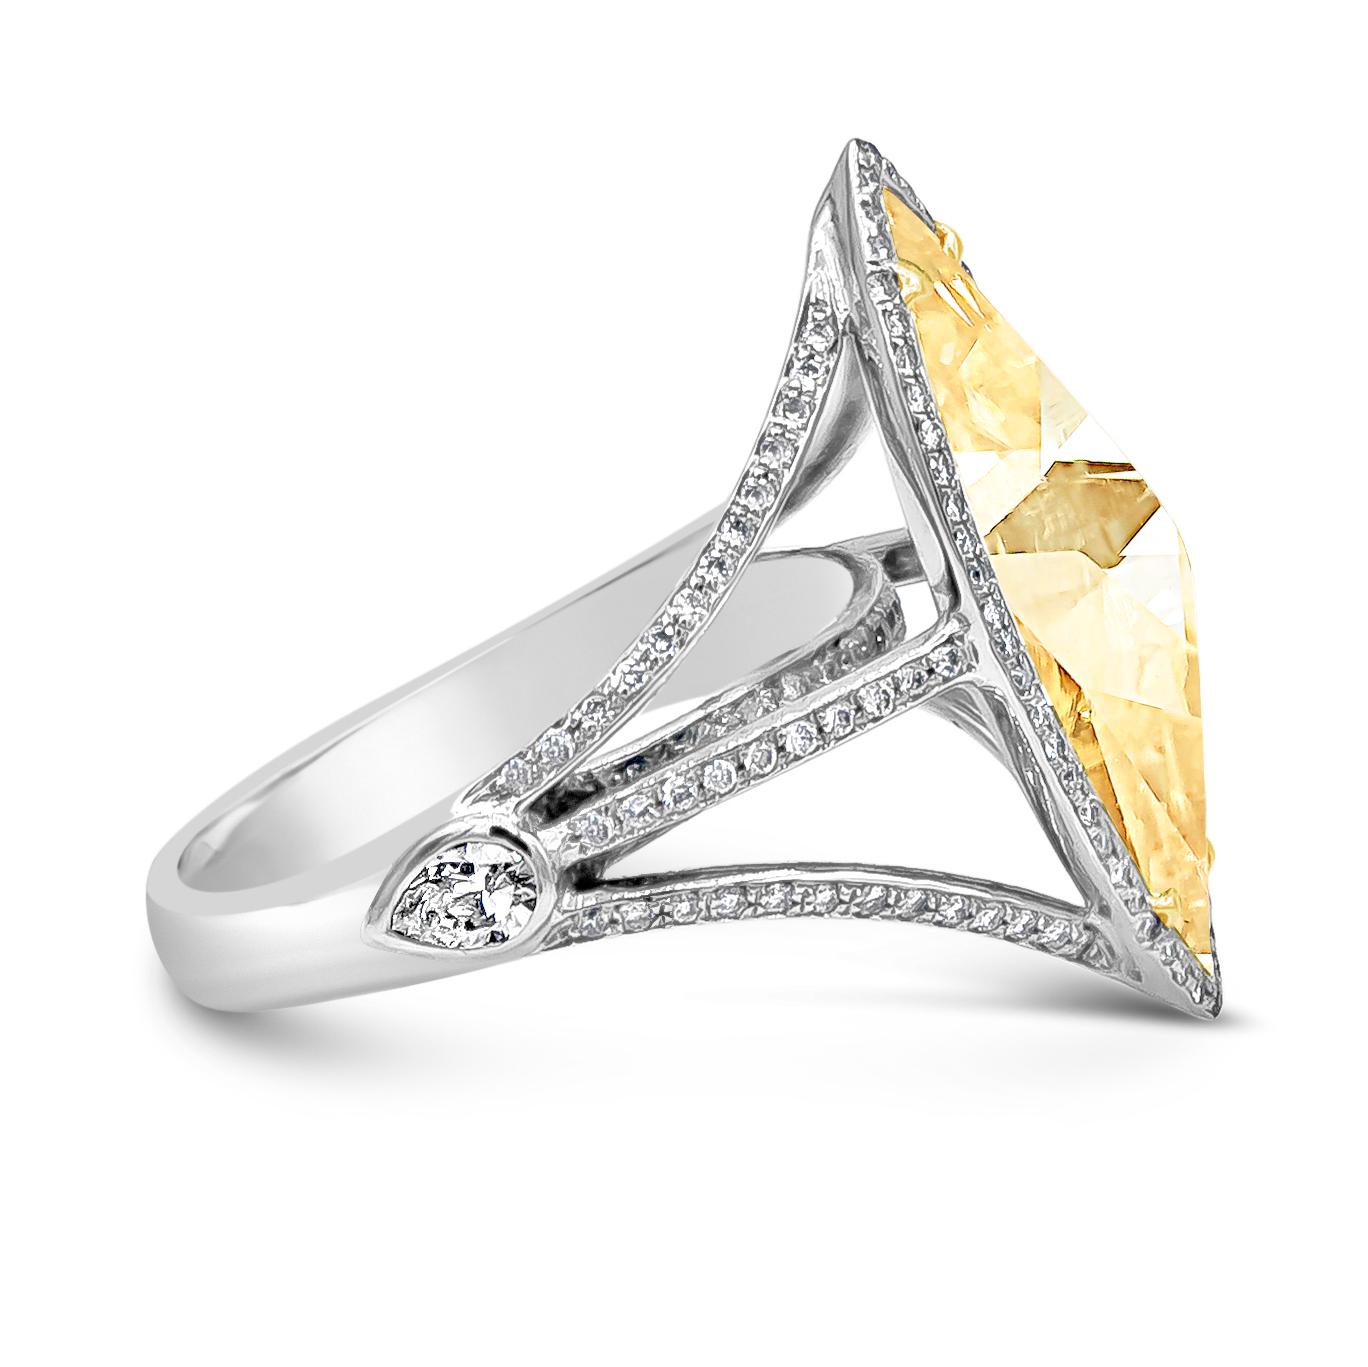 Showcasing a 3.58 carat rose cut marquise yellowish diamond, EGL certified L color and VVS2 in clarity set in a four prong 18K yellow Gold. Accented by a single row of halo round brilliant diamonds. Set in an 18 karat white gold split-shank half